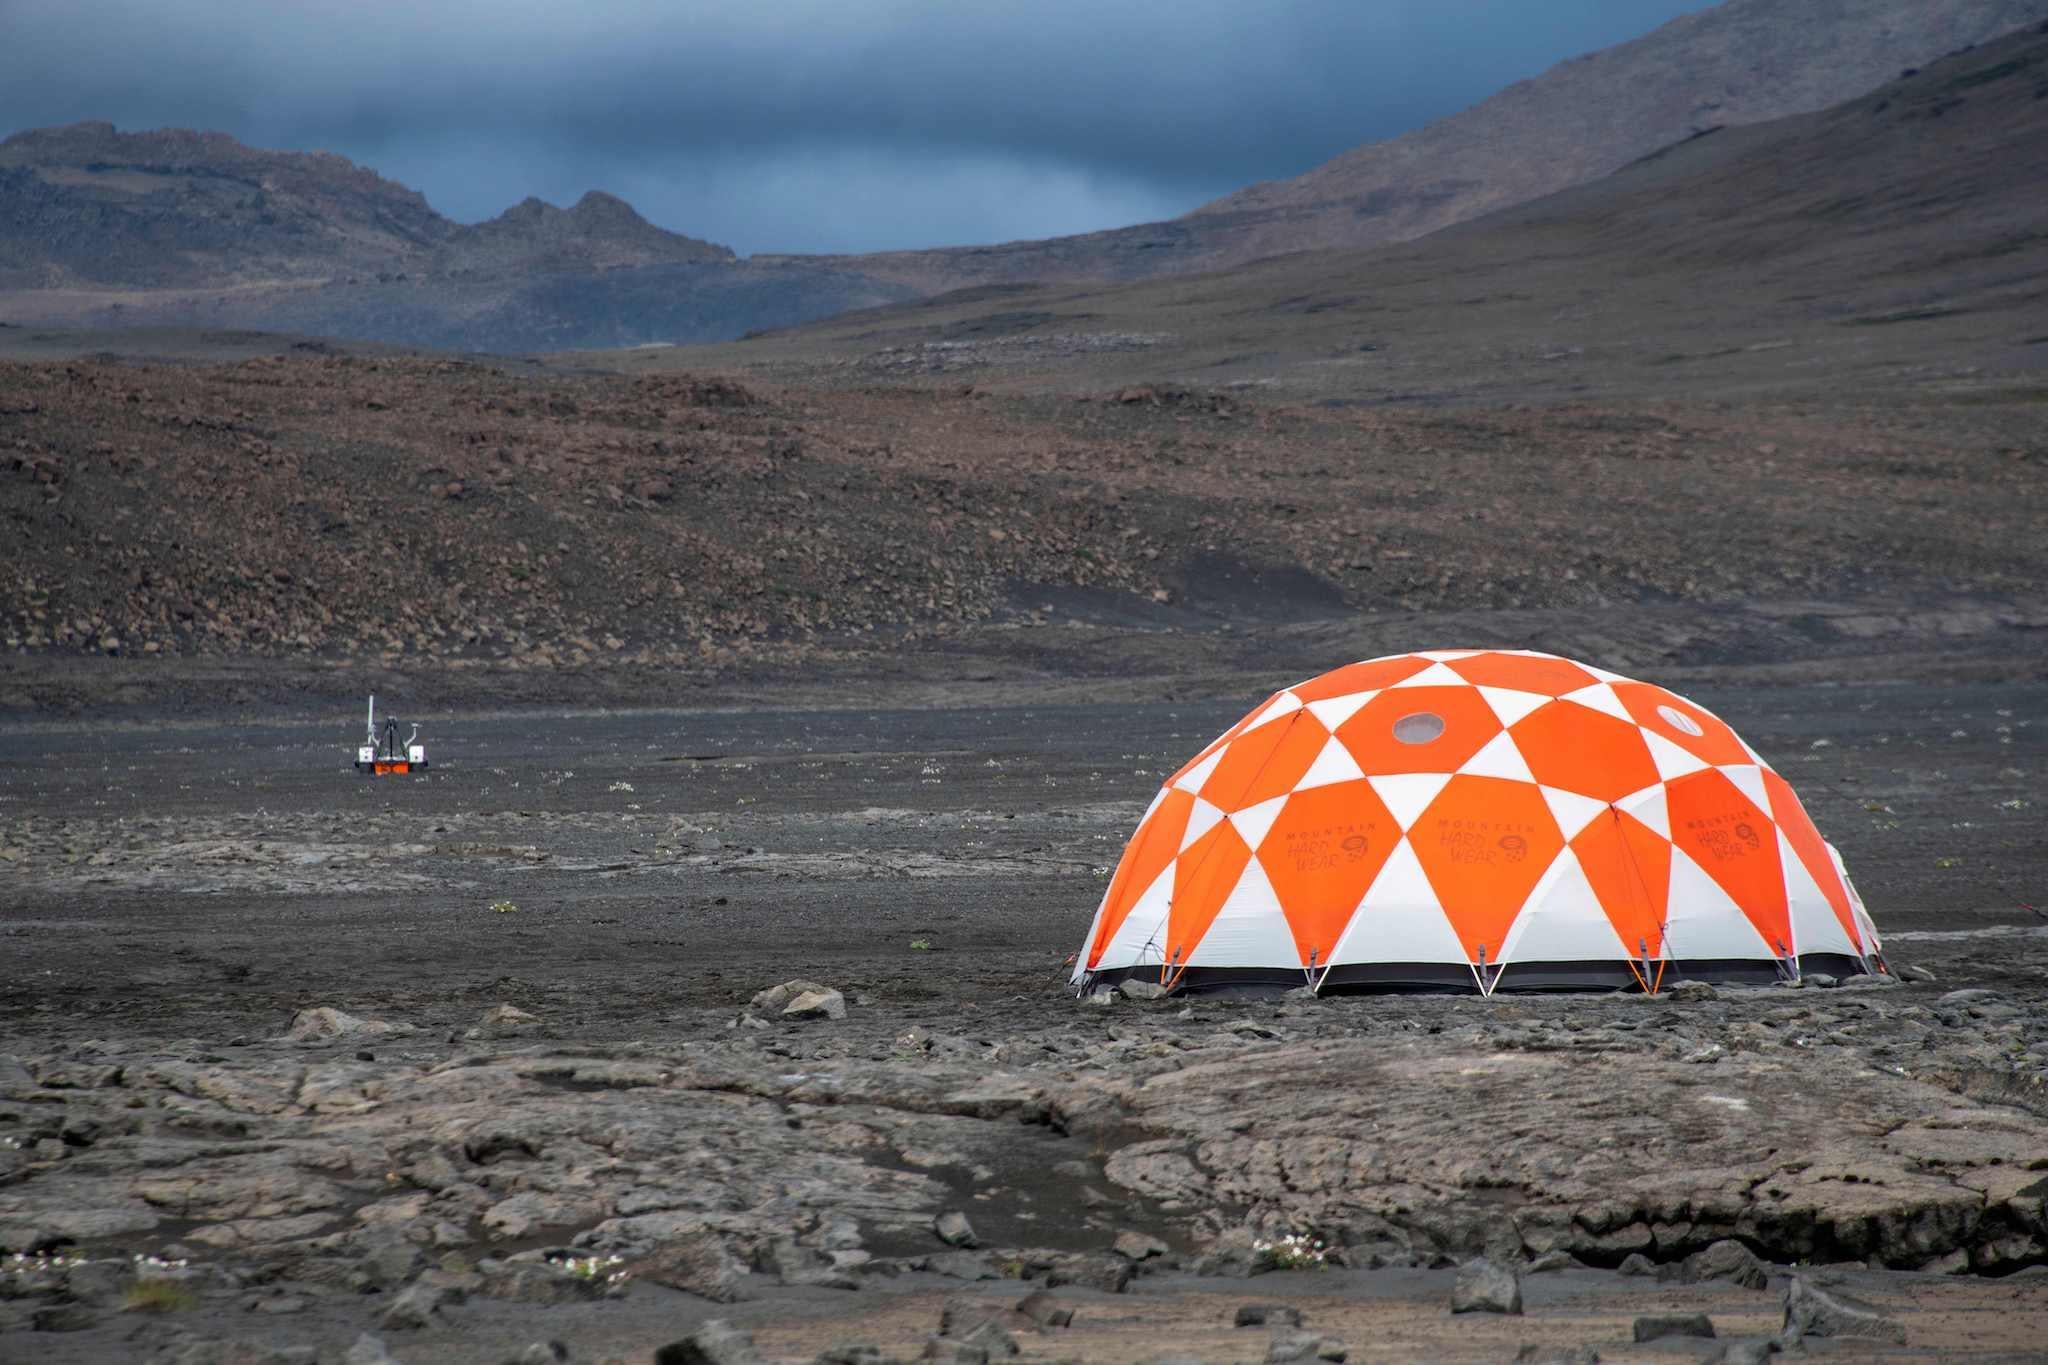 In this picture taken on July 19, 2019 shows the NASA base at the Lambahraun lava field in Iceland where they are getting their new robotic space explorer ready for the next mission to Mars